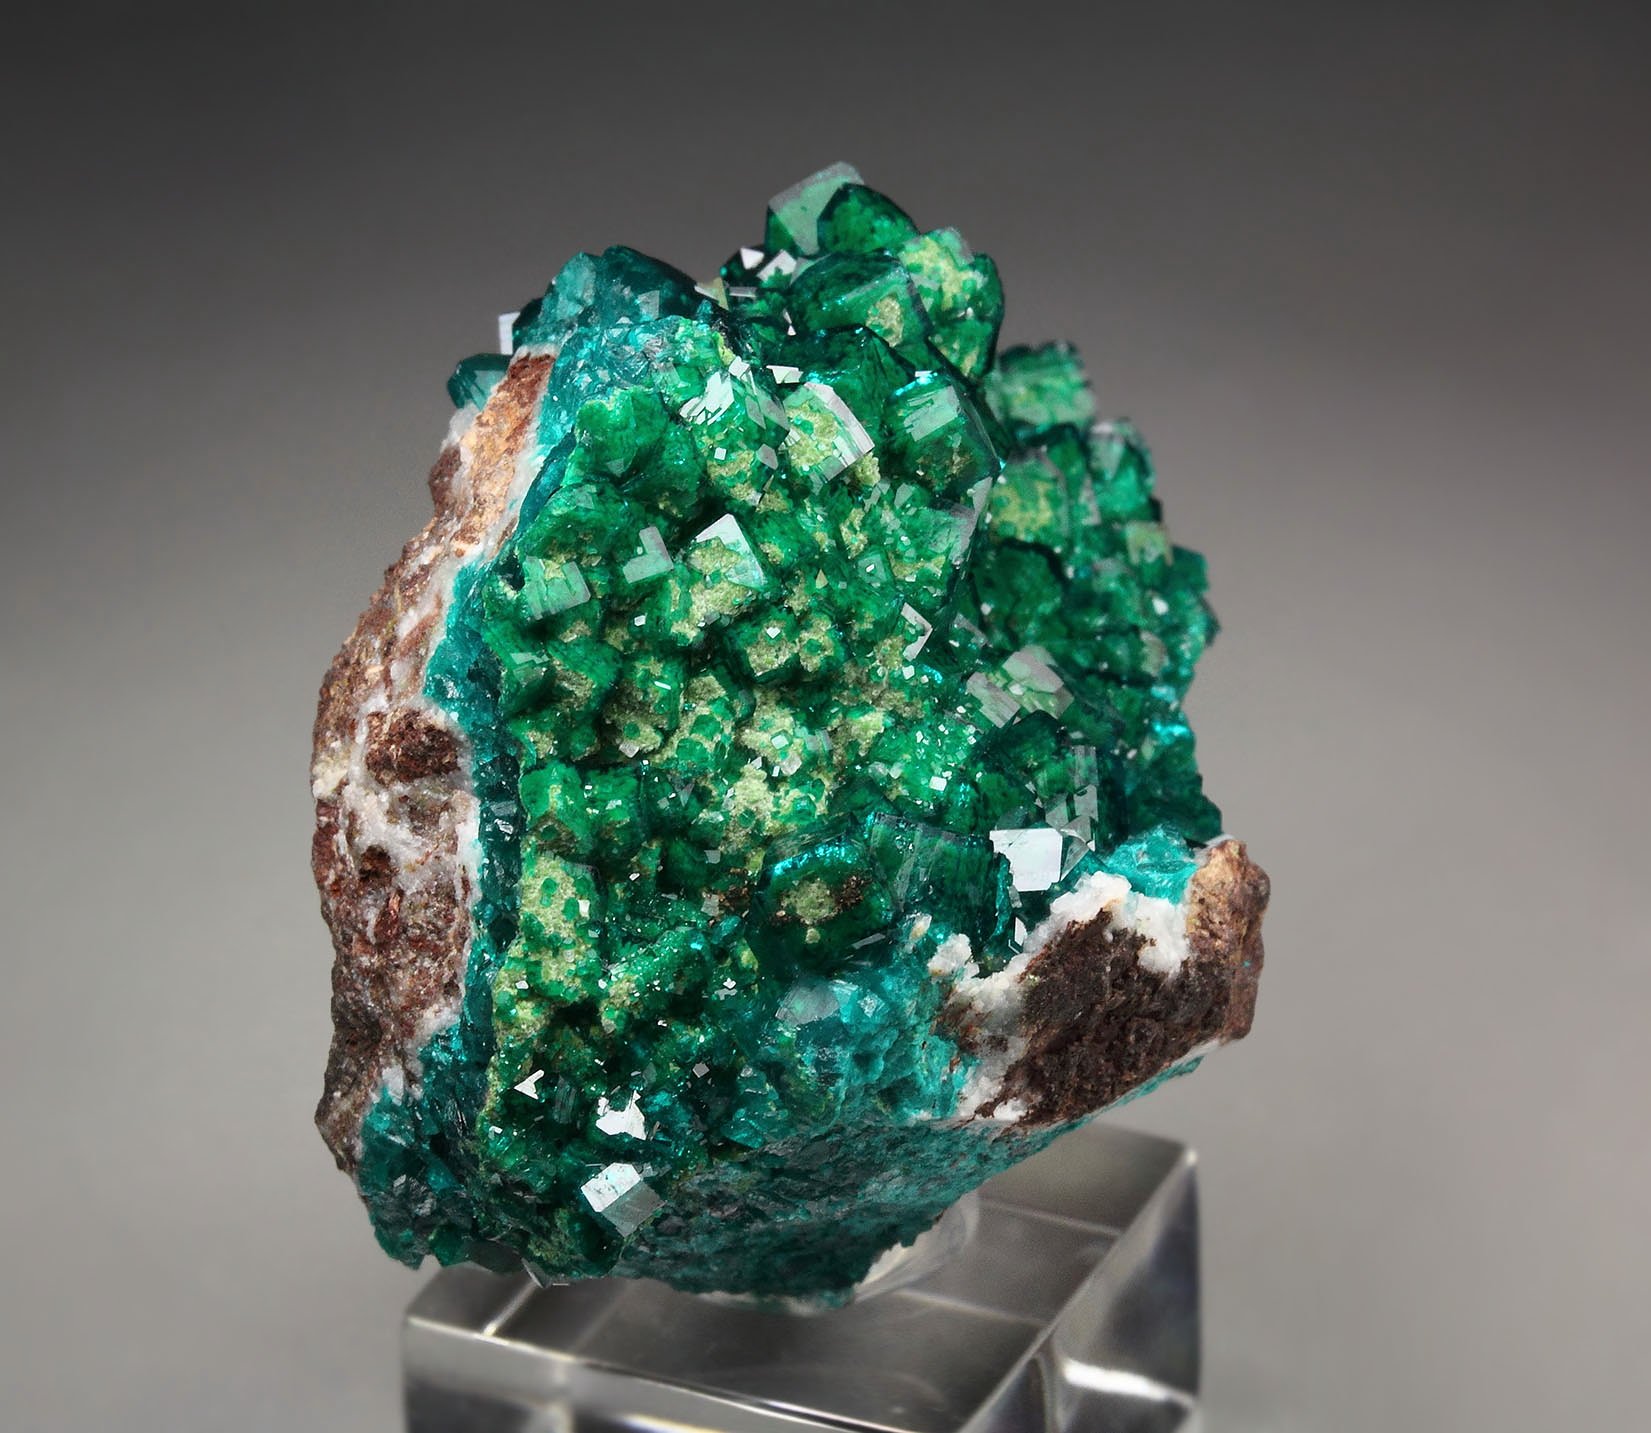 gemmy DIOPTASE with DUFTITE inclusions, CALCITE 